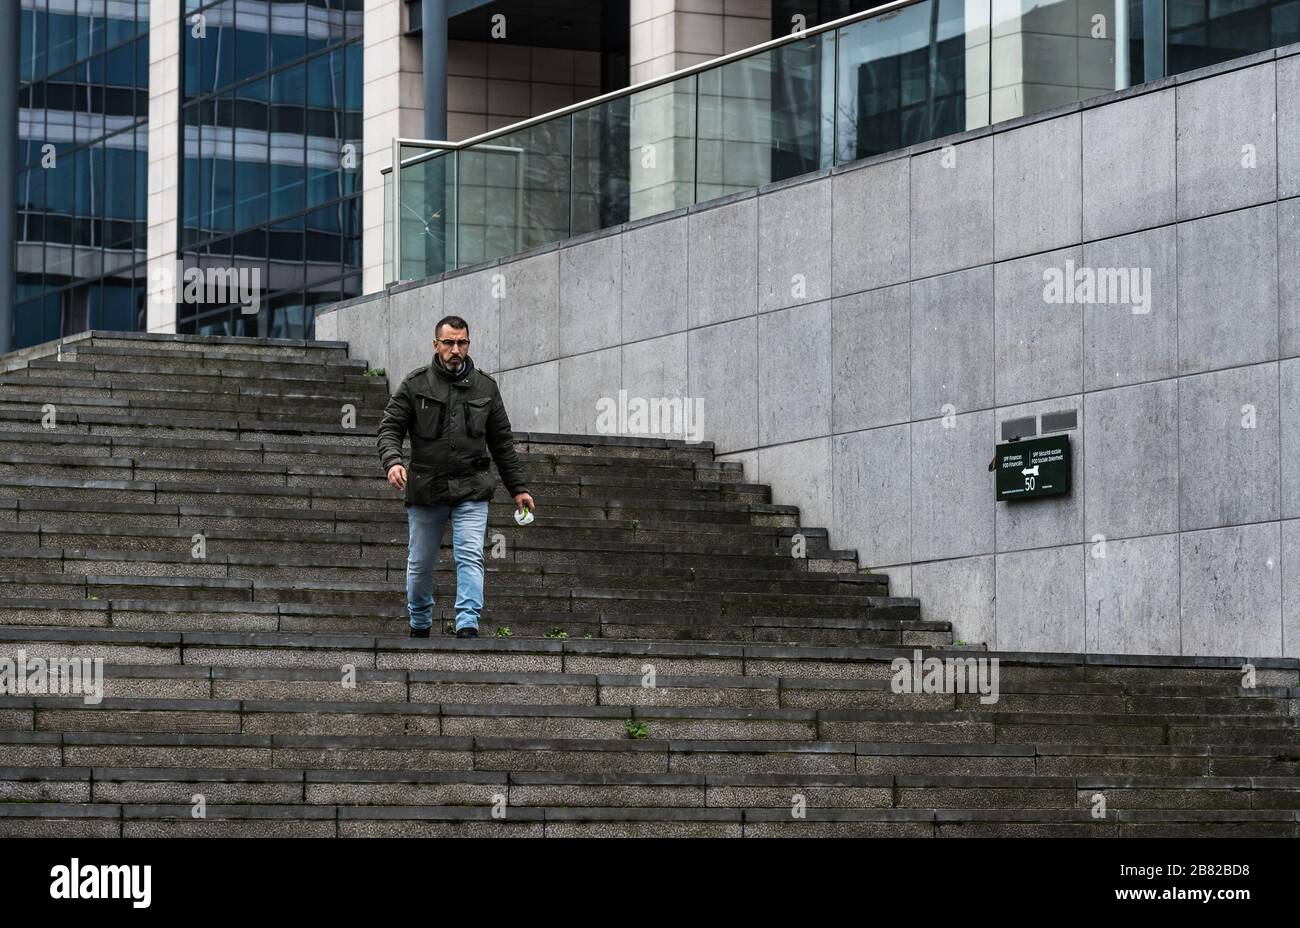 Brussels Business district, Brussels Capital Region / Belgium - 02 04 2020: Man walking down the front stairs of the Finance Tower Stock Photo